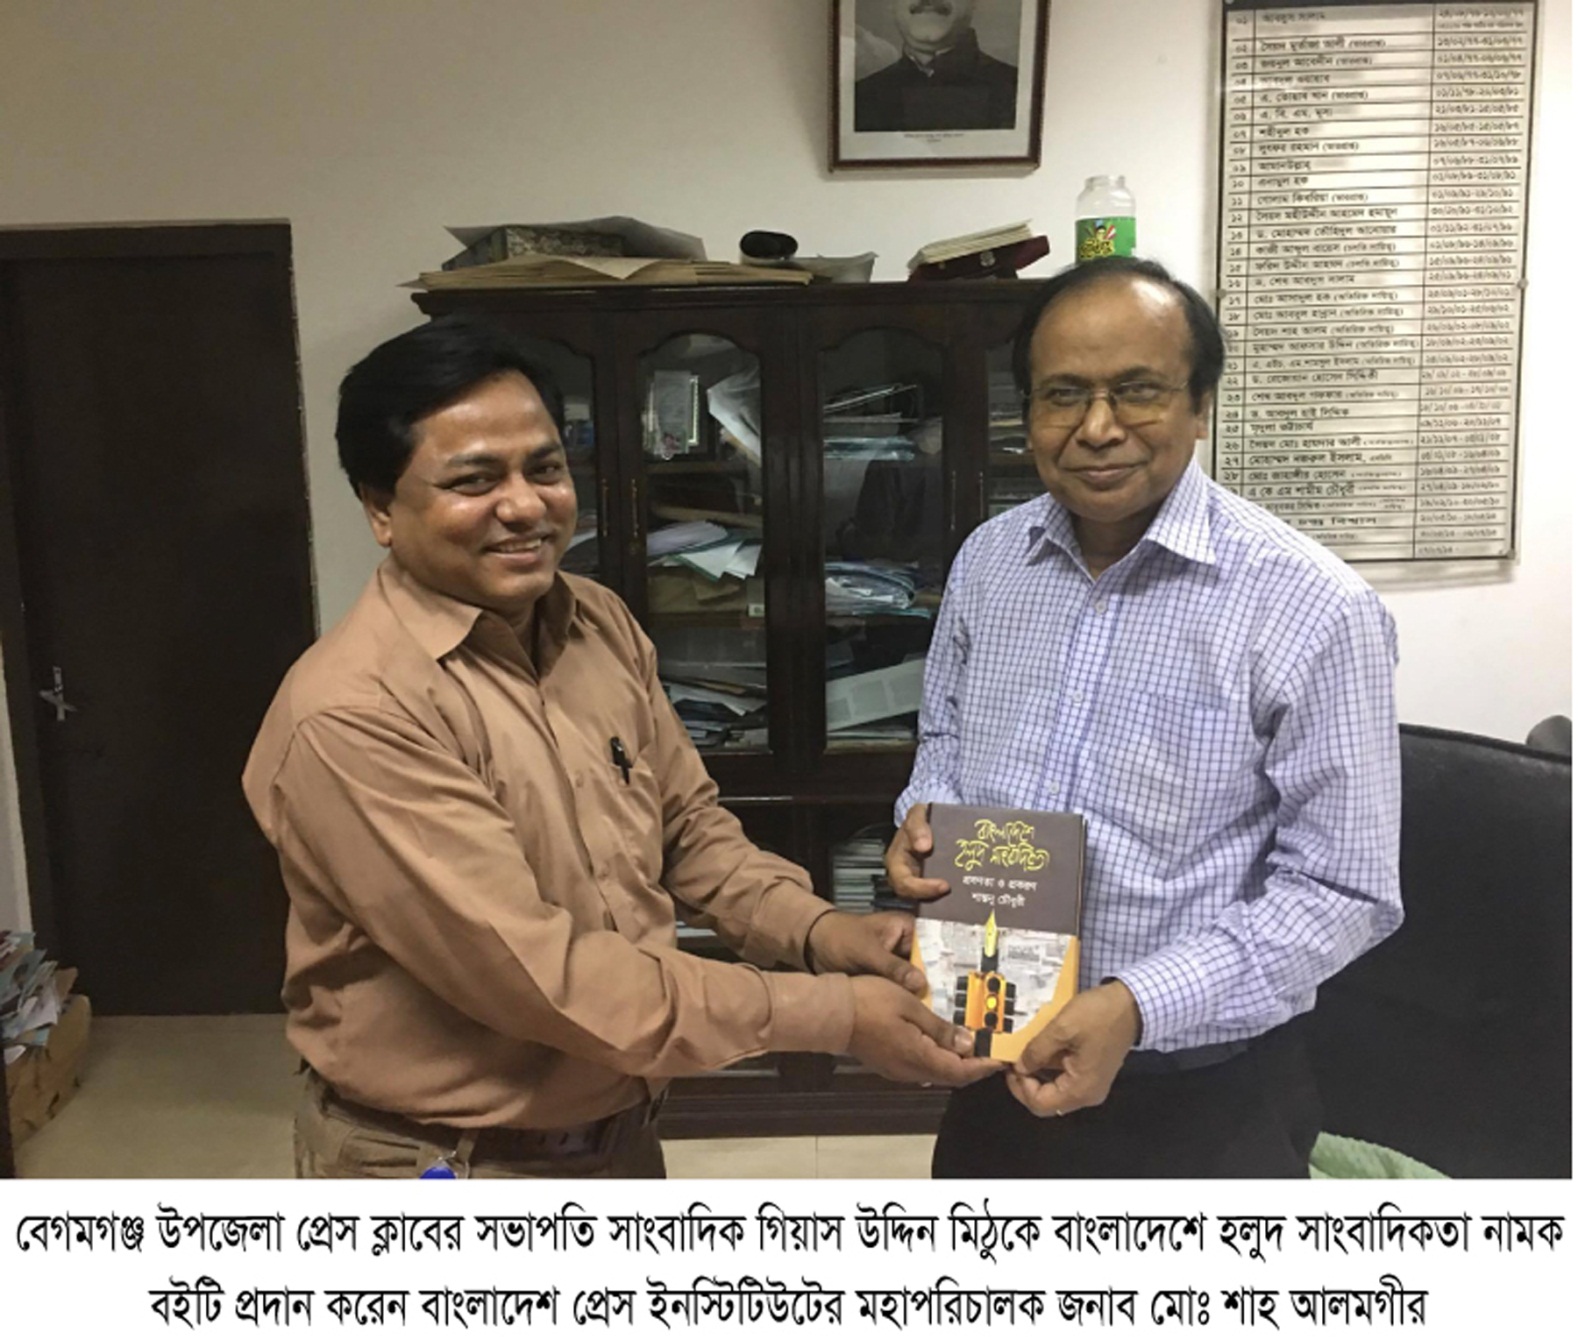 In the picture- Chairman of Begamganj-Sonaimuri Education and Health Development Foundation and Principal, Begumganj Technical & Computer Institute Md. Giash Uddin Mithu is handed over the book by Former Director General of Bangladesh Press Institute Mr. Shah Alam.